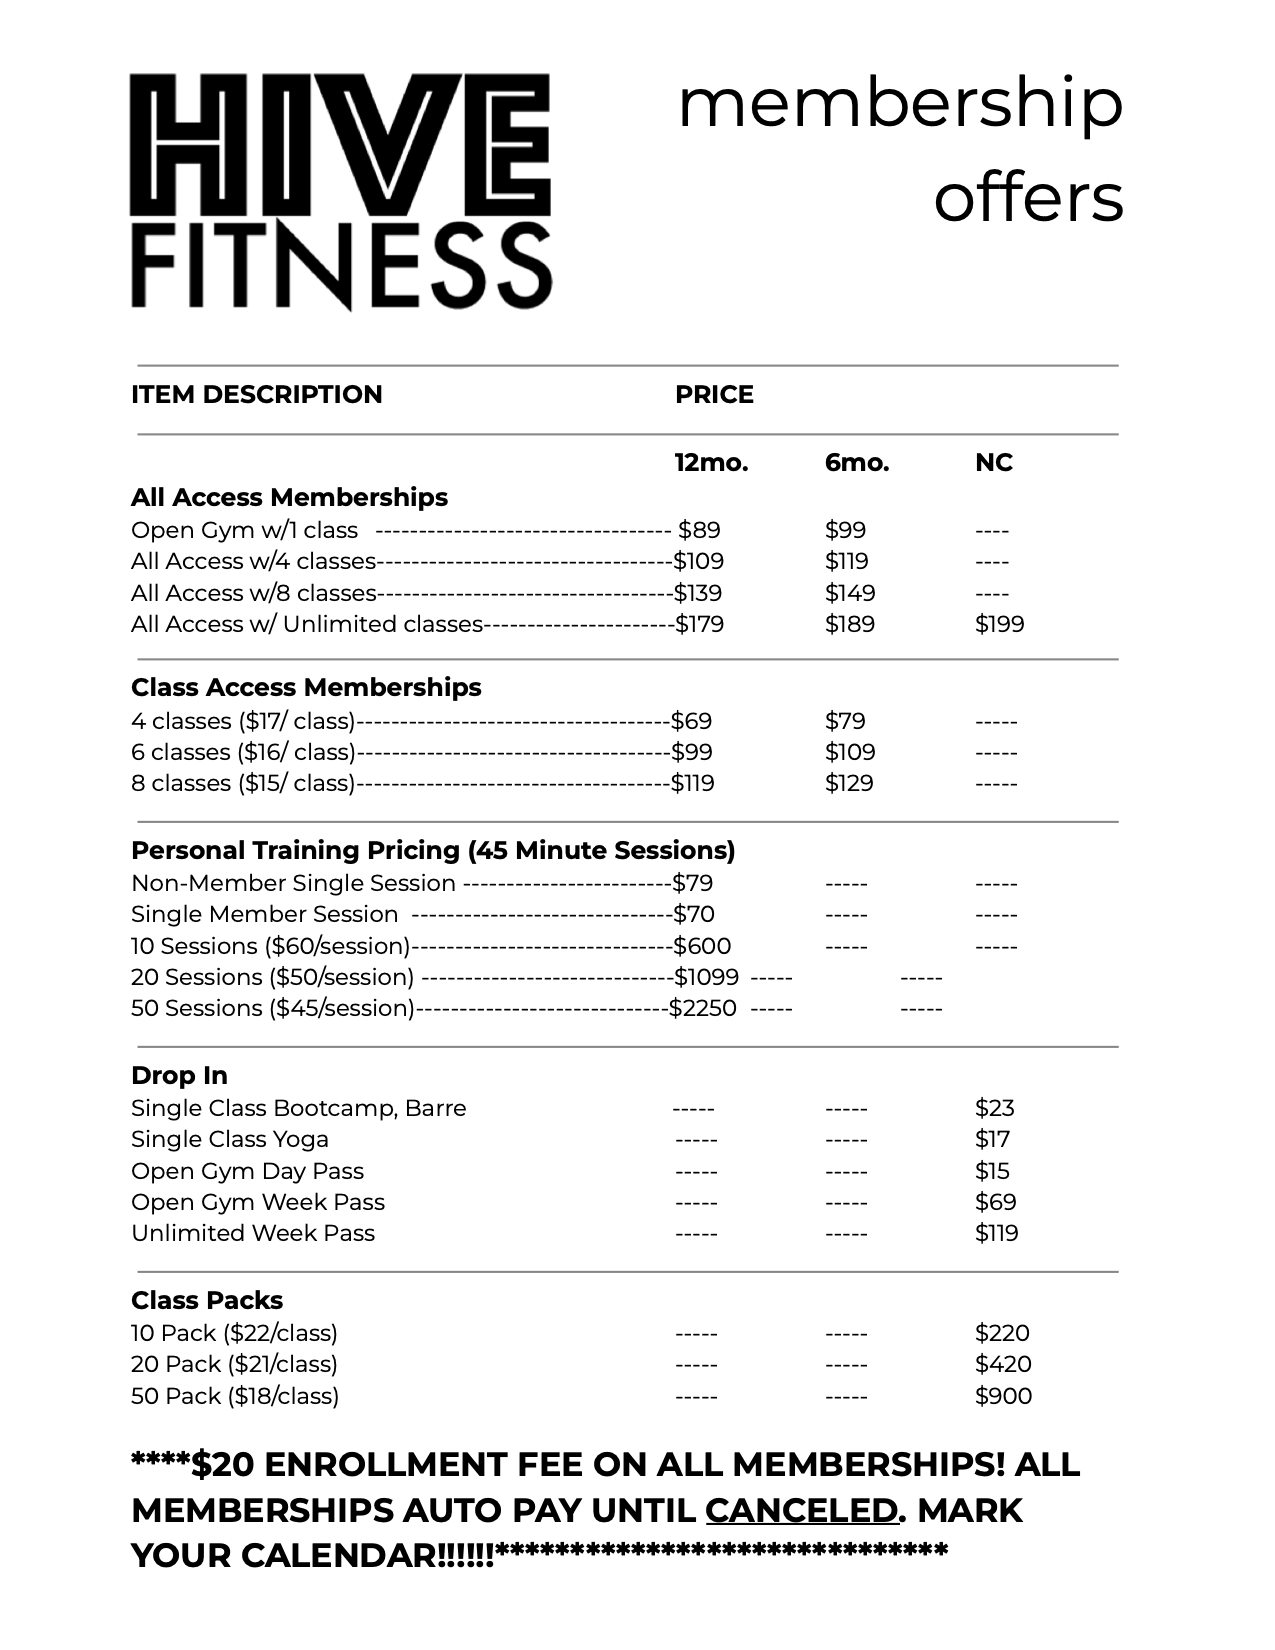 HIVE FITNESS membership offers-14